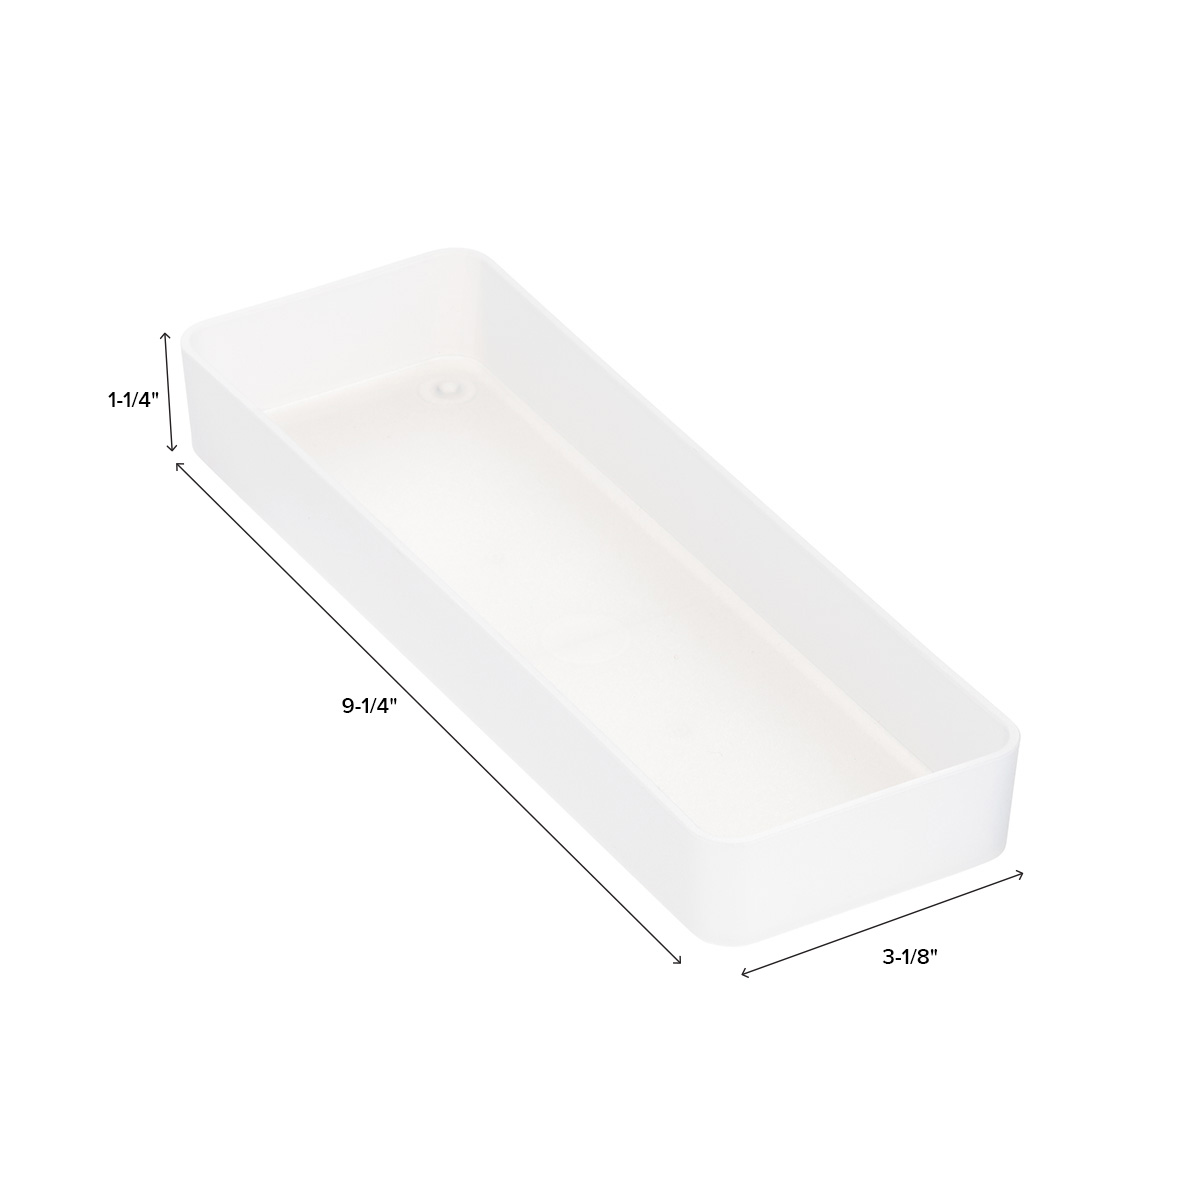 https://www.containerstore.com/catalogimages/445765/10079323-shimo-shallow-drawer-organi.jpg